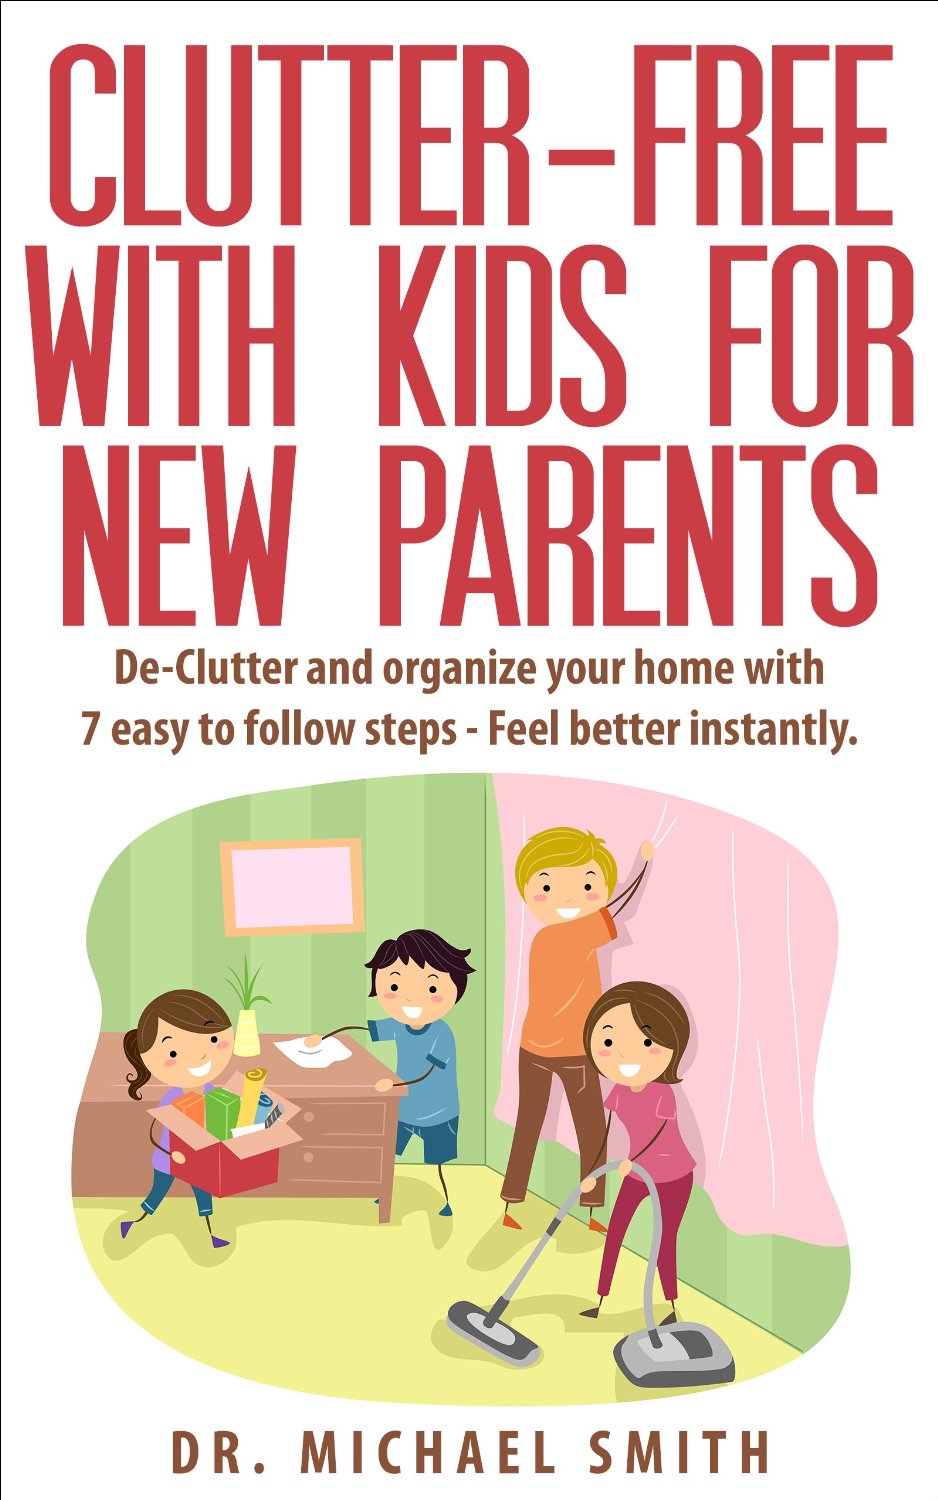 Clutter-Free With Kids For New Parents: De-Clutter and organize your home with 7 easy to follow steps – Feel better instantly by Dr. Michael Smith